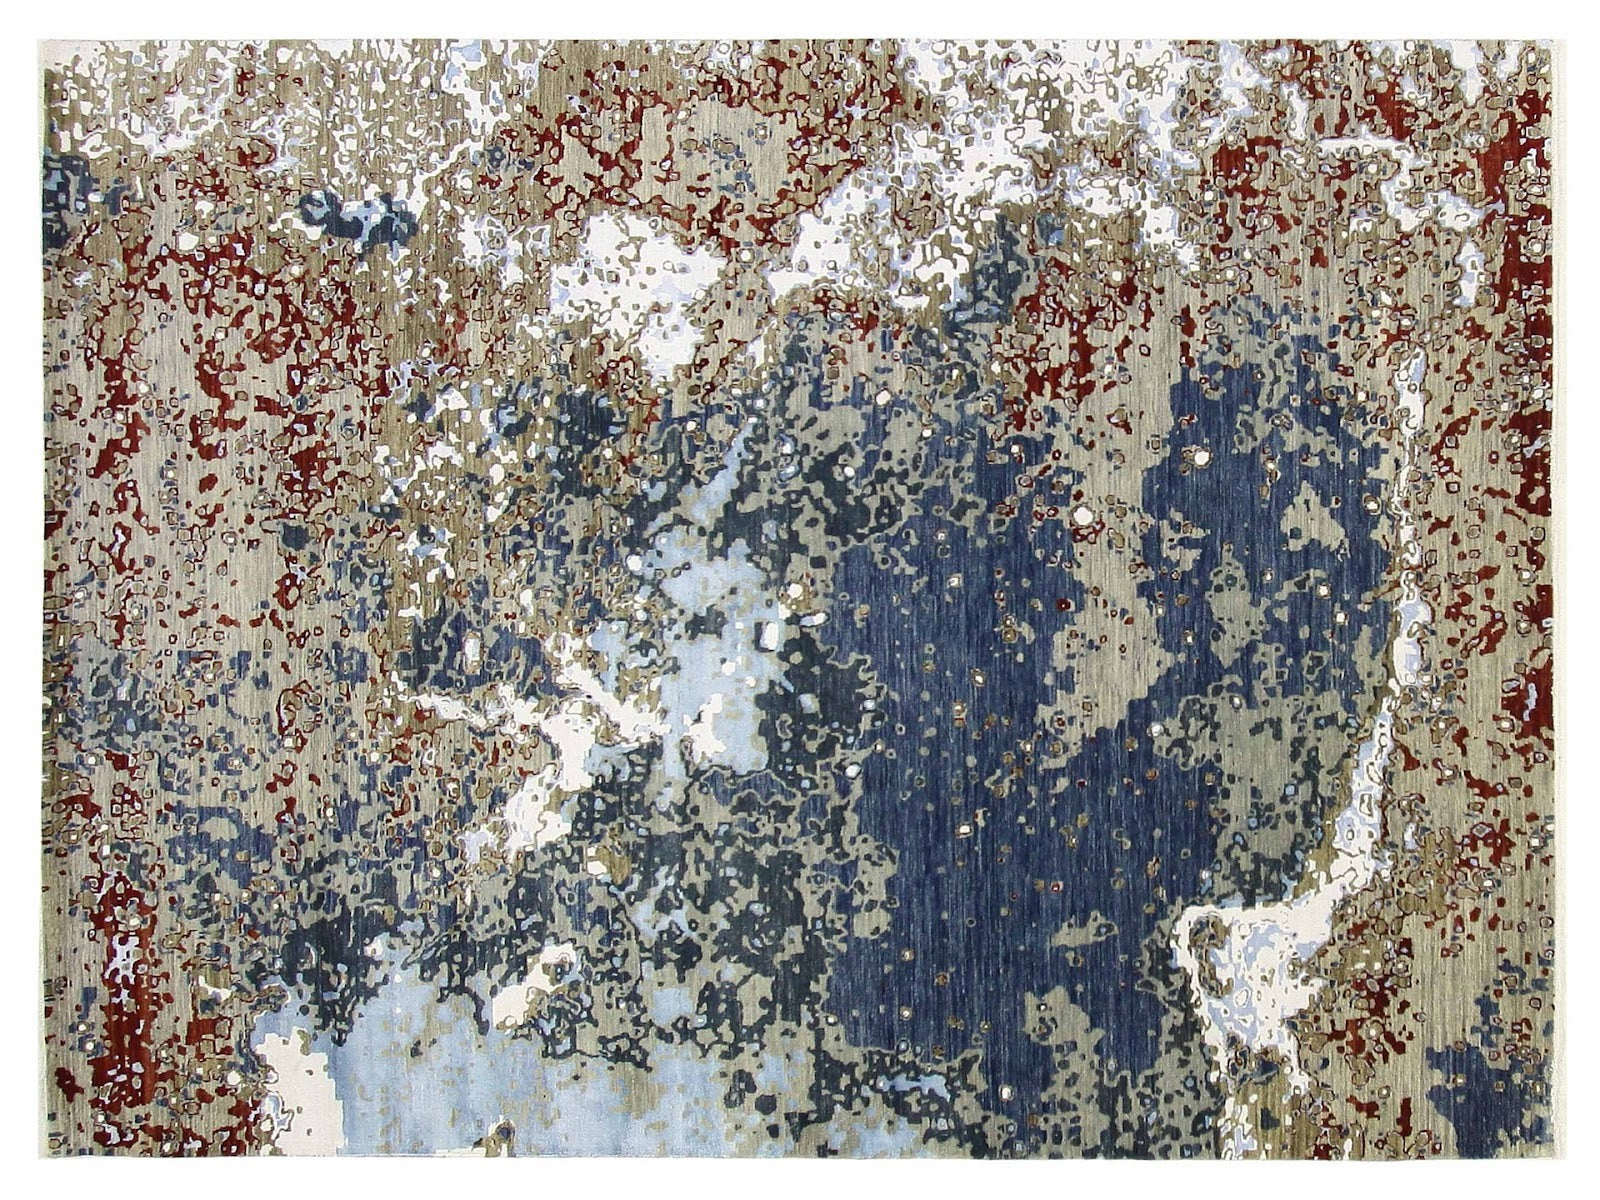 10x14 hand-knotted wool rug from Turkey with a modern galaxy design in shades of blues, beige, with white and red touches